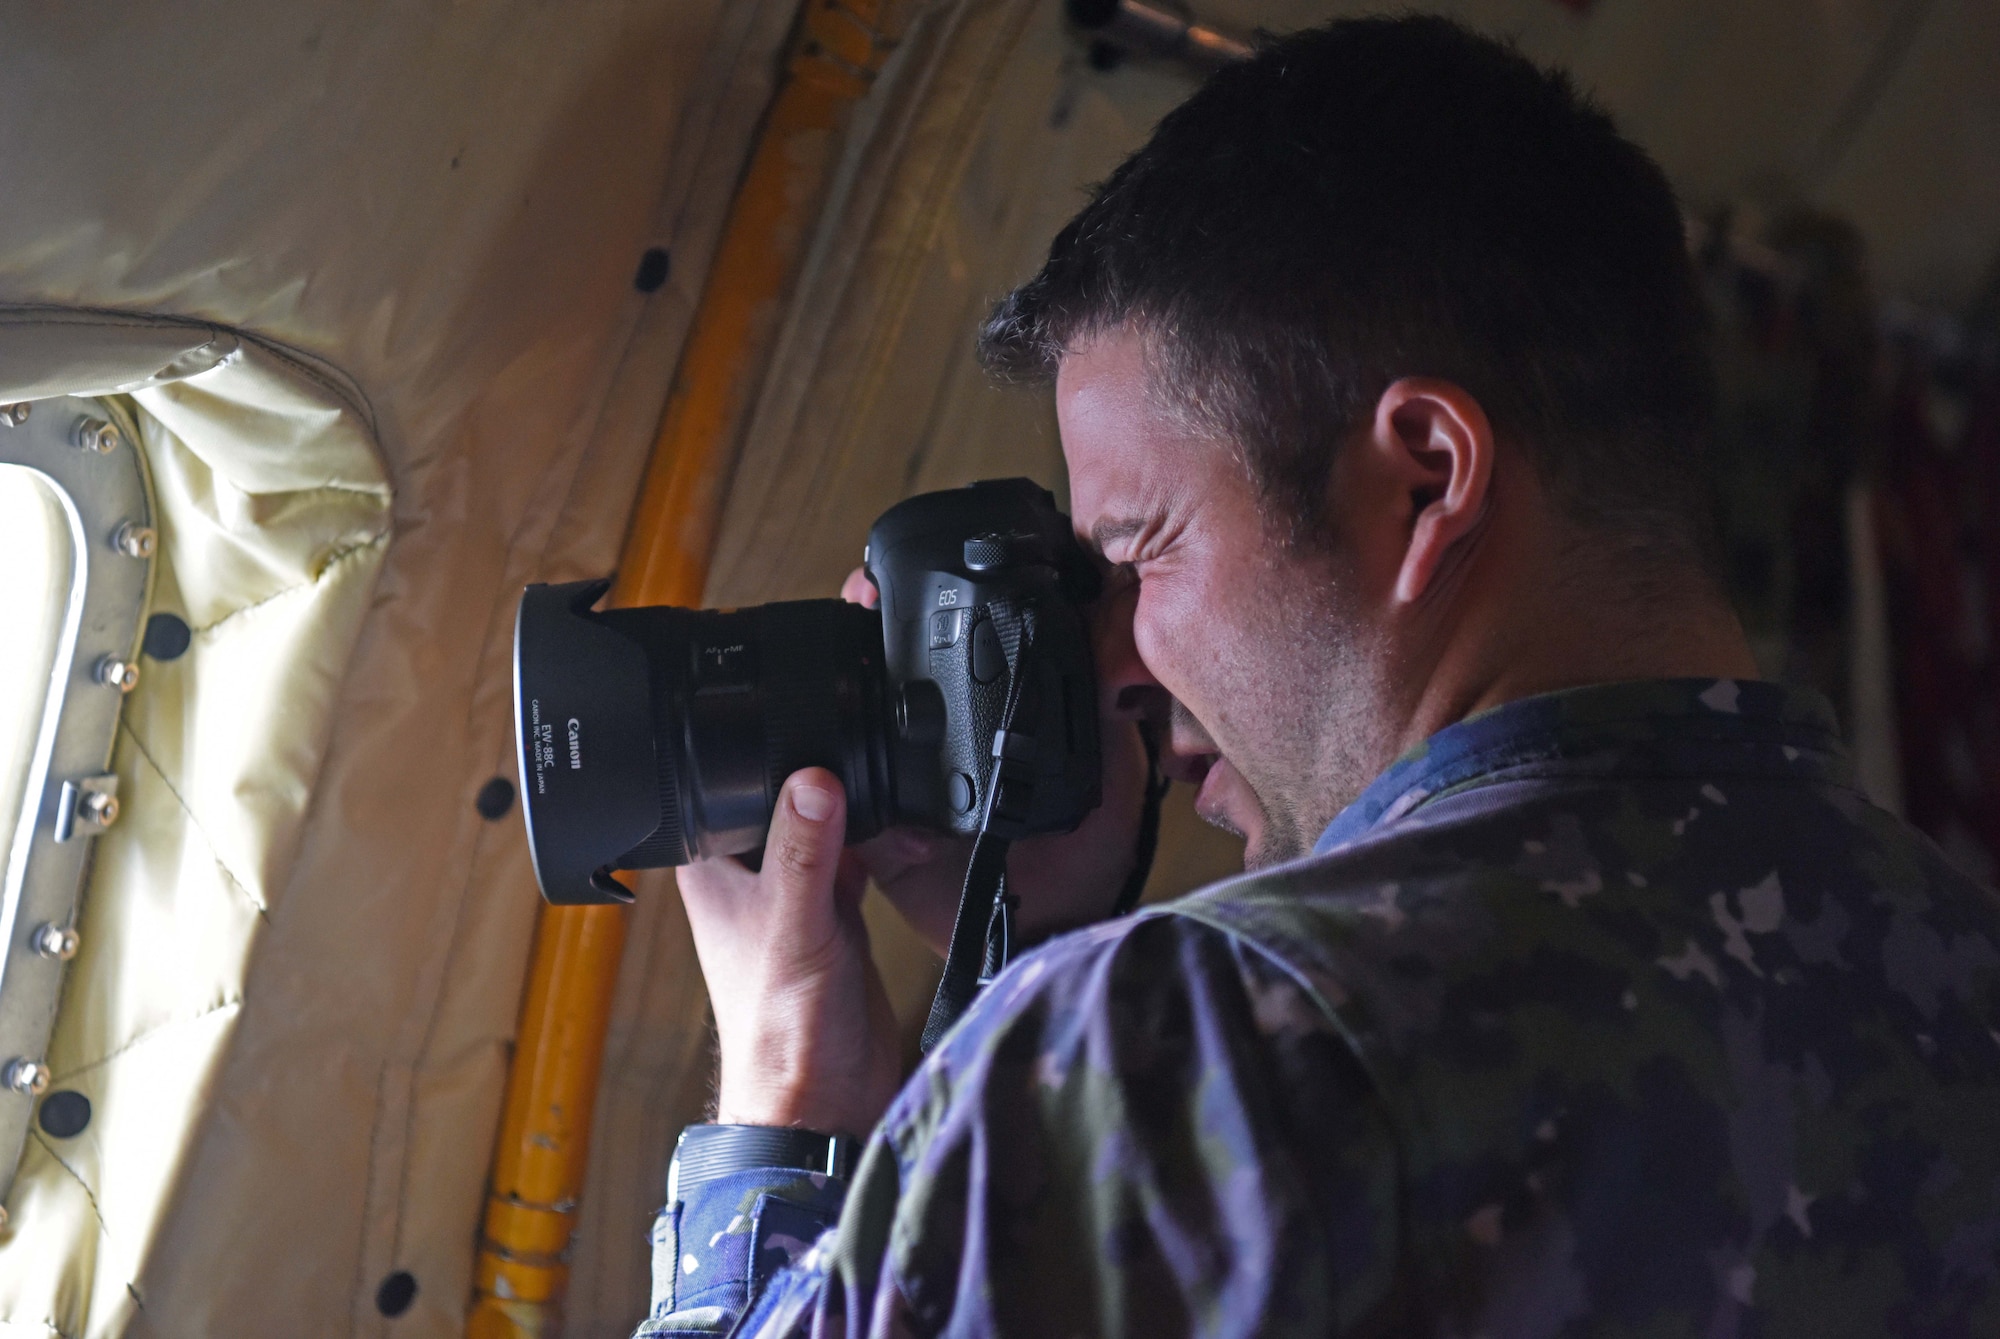 Romanian air force Warrant Officer Bogdan Pantilimon takes photos during aerial refueling training with Romanian F-16s over the skies of Romania, March 12, 2019. The training was an example of U.S. and NATO allies sharing a commitment to promote peace and stability through developing their relationship and communication process. (U.S. Air Force photo by Airman 1st Class Brandon Esau)